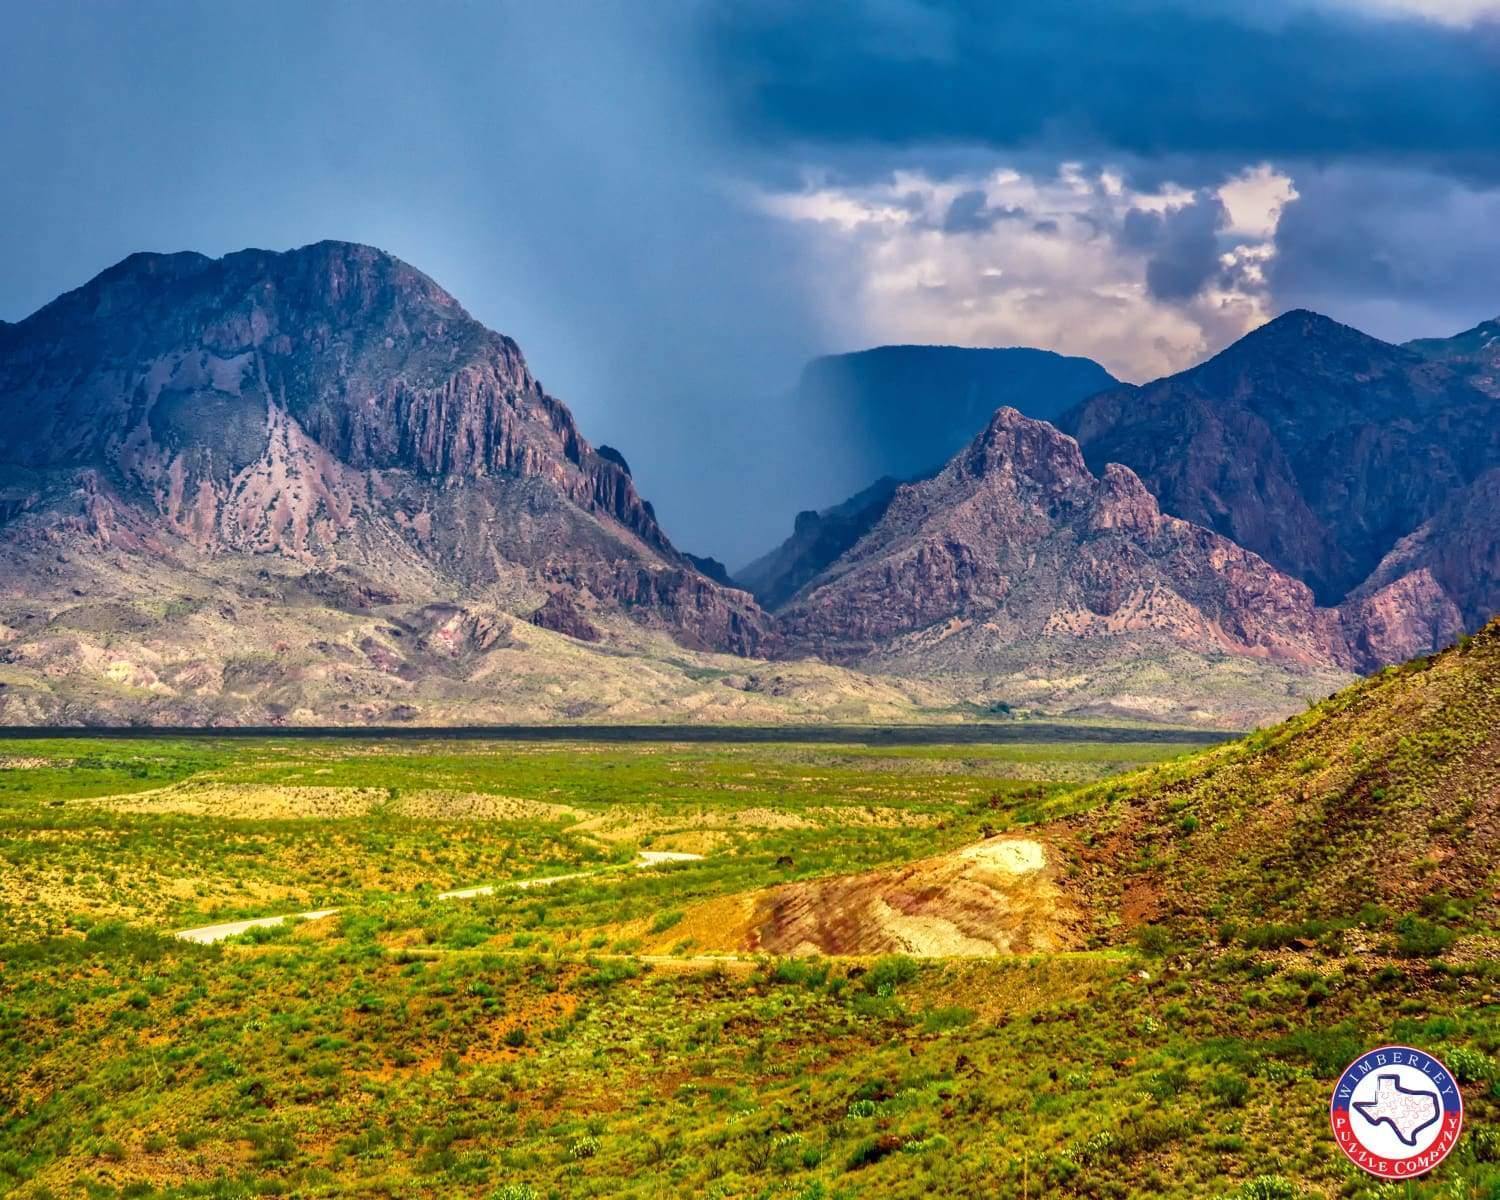 A wooden national parks puzzle featuring a beautiful thunderstorm, the desert, and mountains of Big Bend National Park